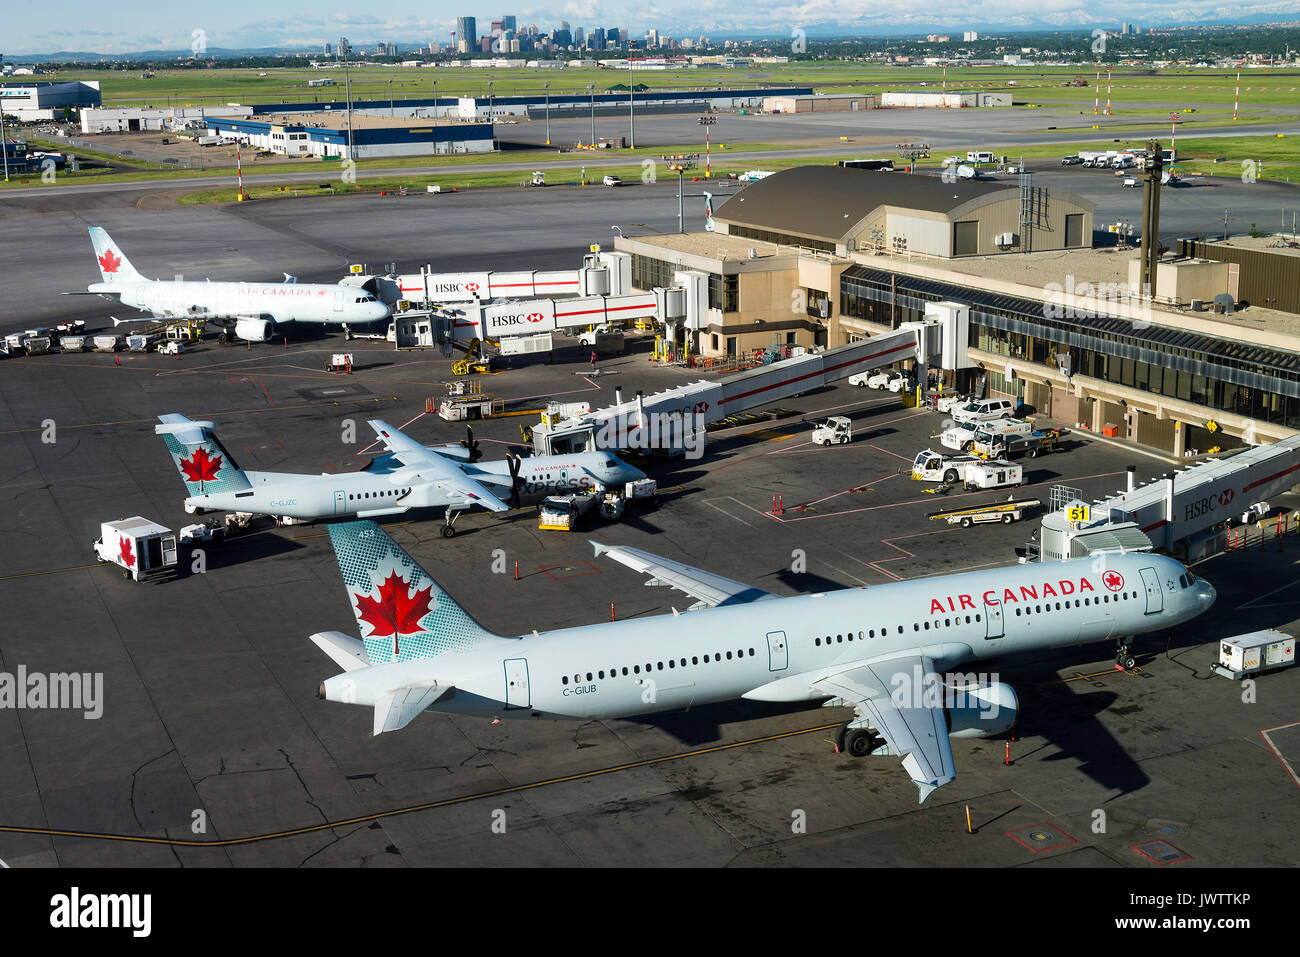 A Selection of Air Canada and Air Canada Express Airliners on Stand at Calgary International Airport Alberta Canada Stock Photo